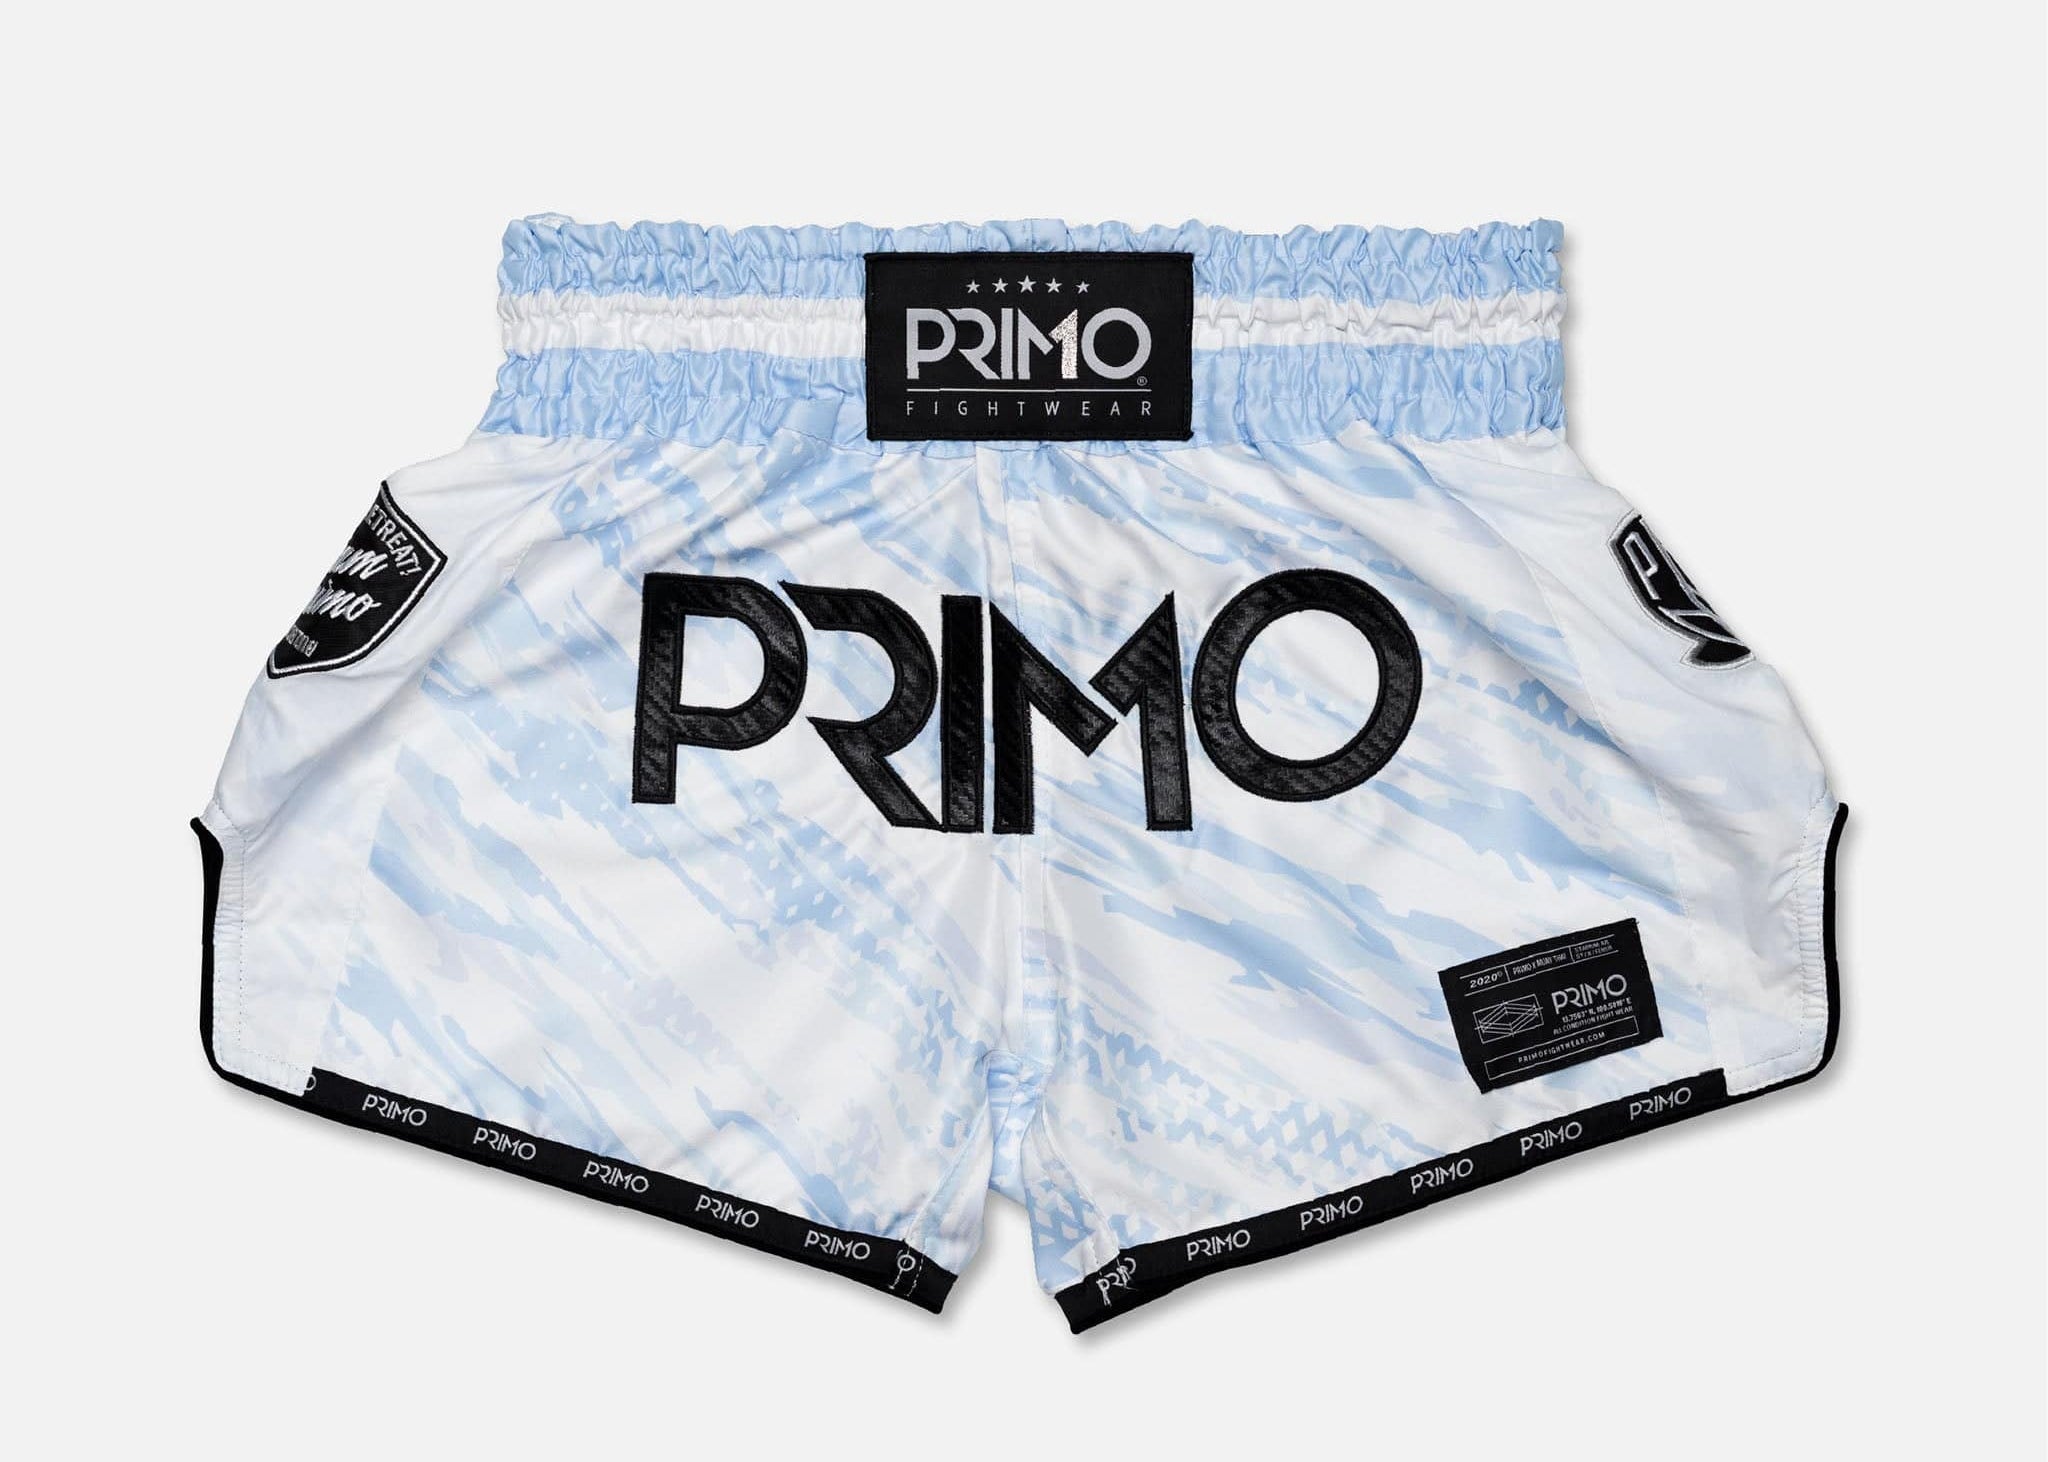 Primo Fight Wear Official Muay Thai Shorts - Arctic Ghost